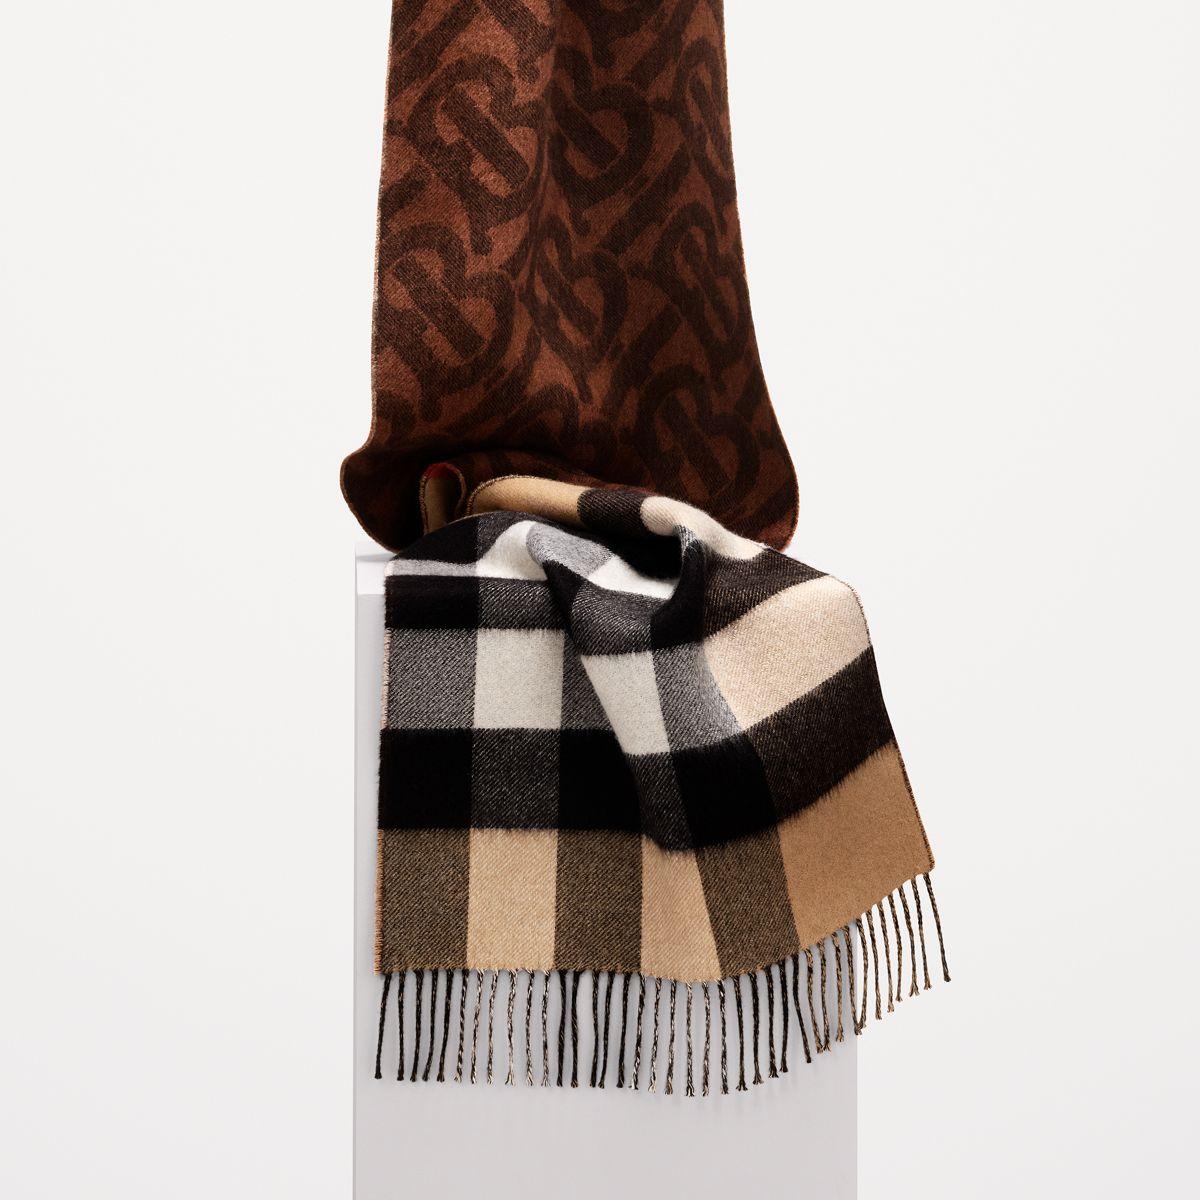 Burberry Reversible Check And Monogram Cashmere Scarf in Dark 